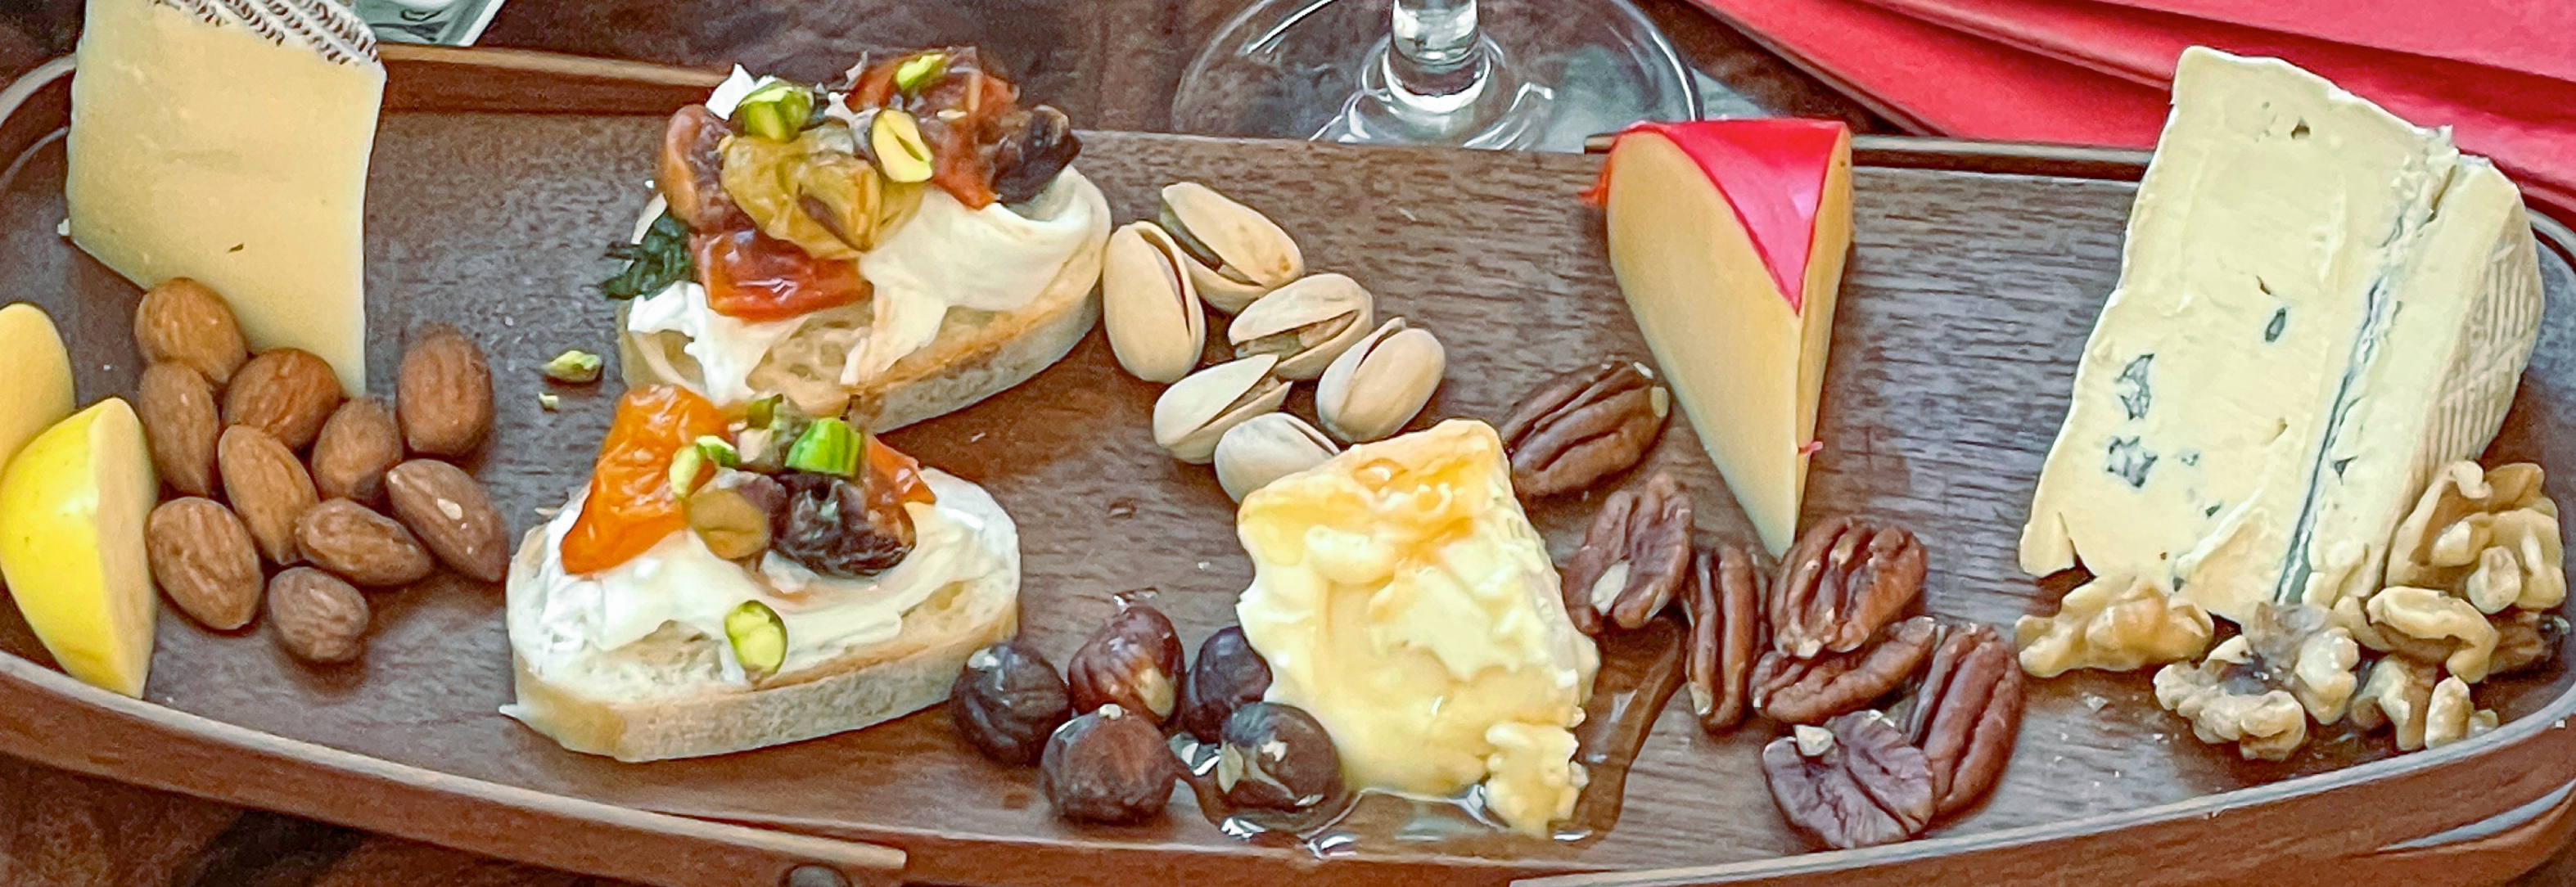 Holiday Pairings with Tree Nuts, Cheese and Bubbles